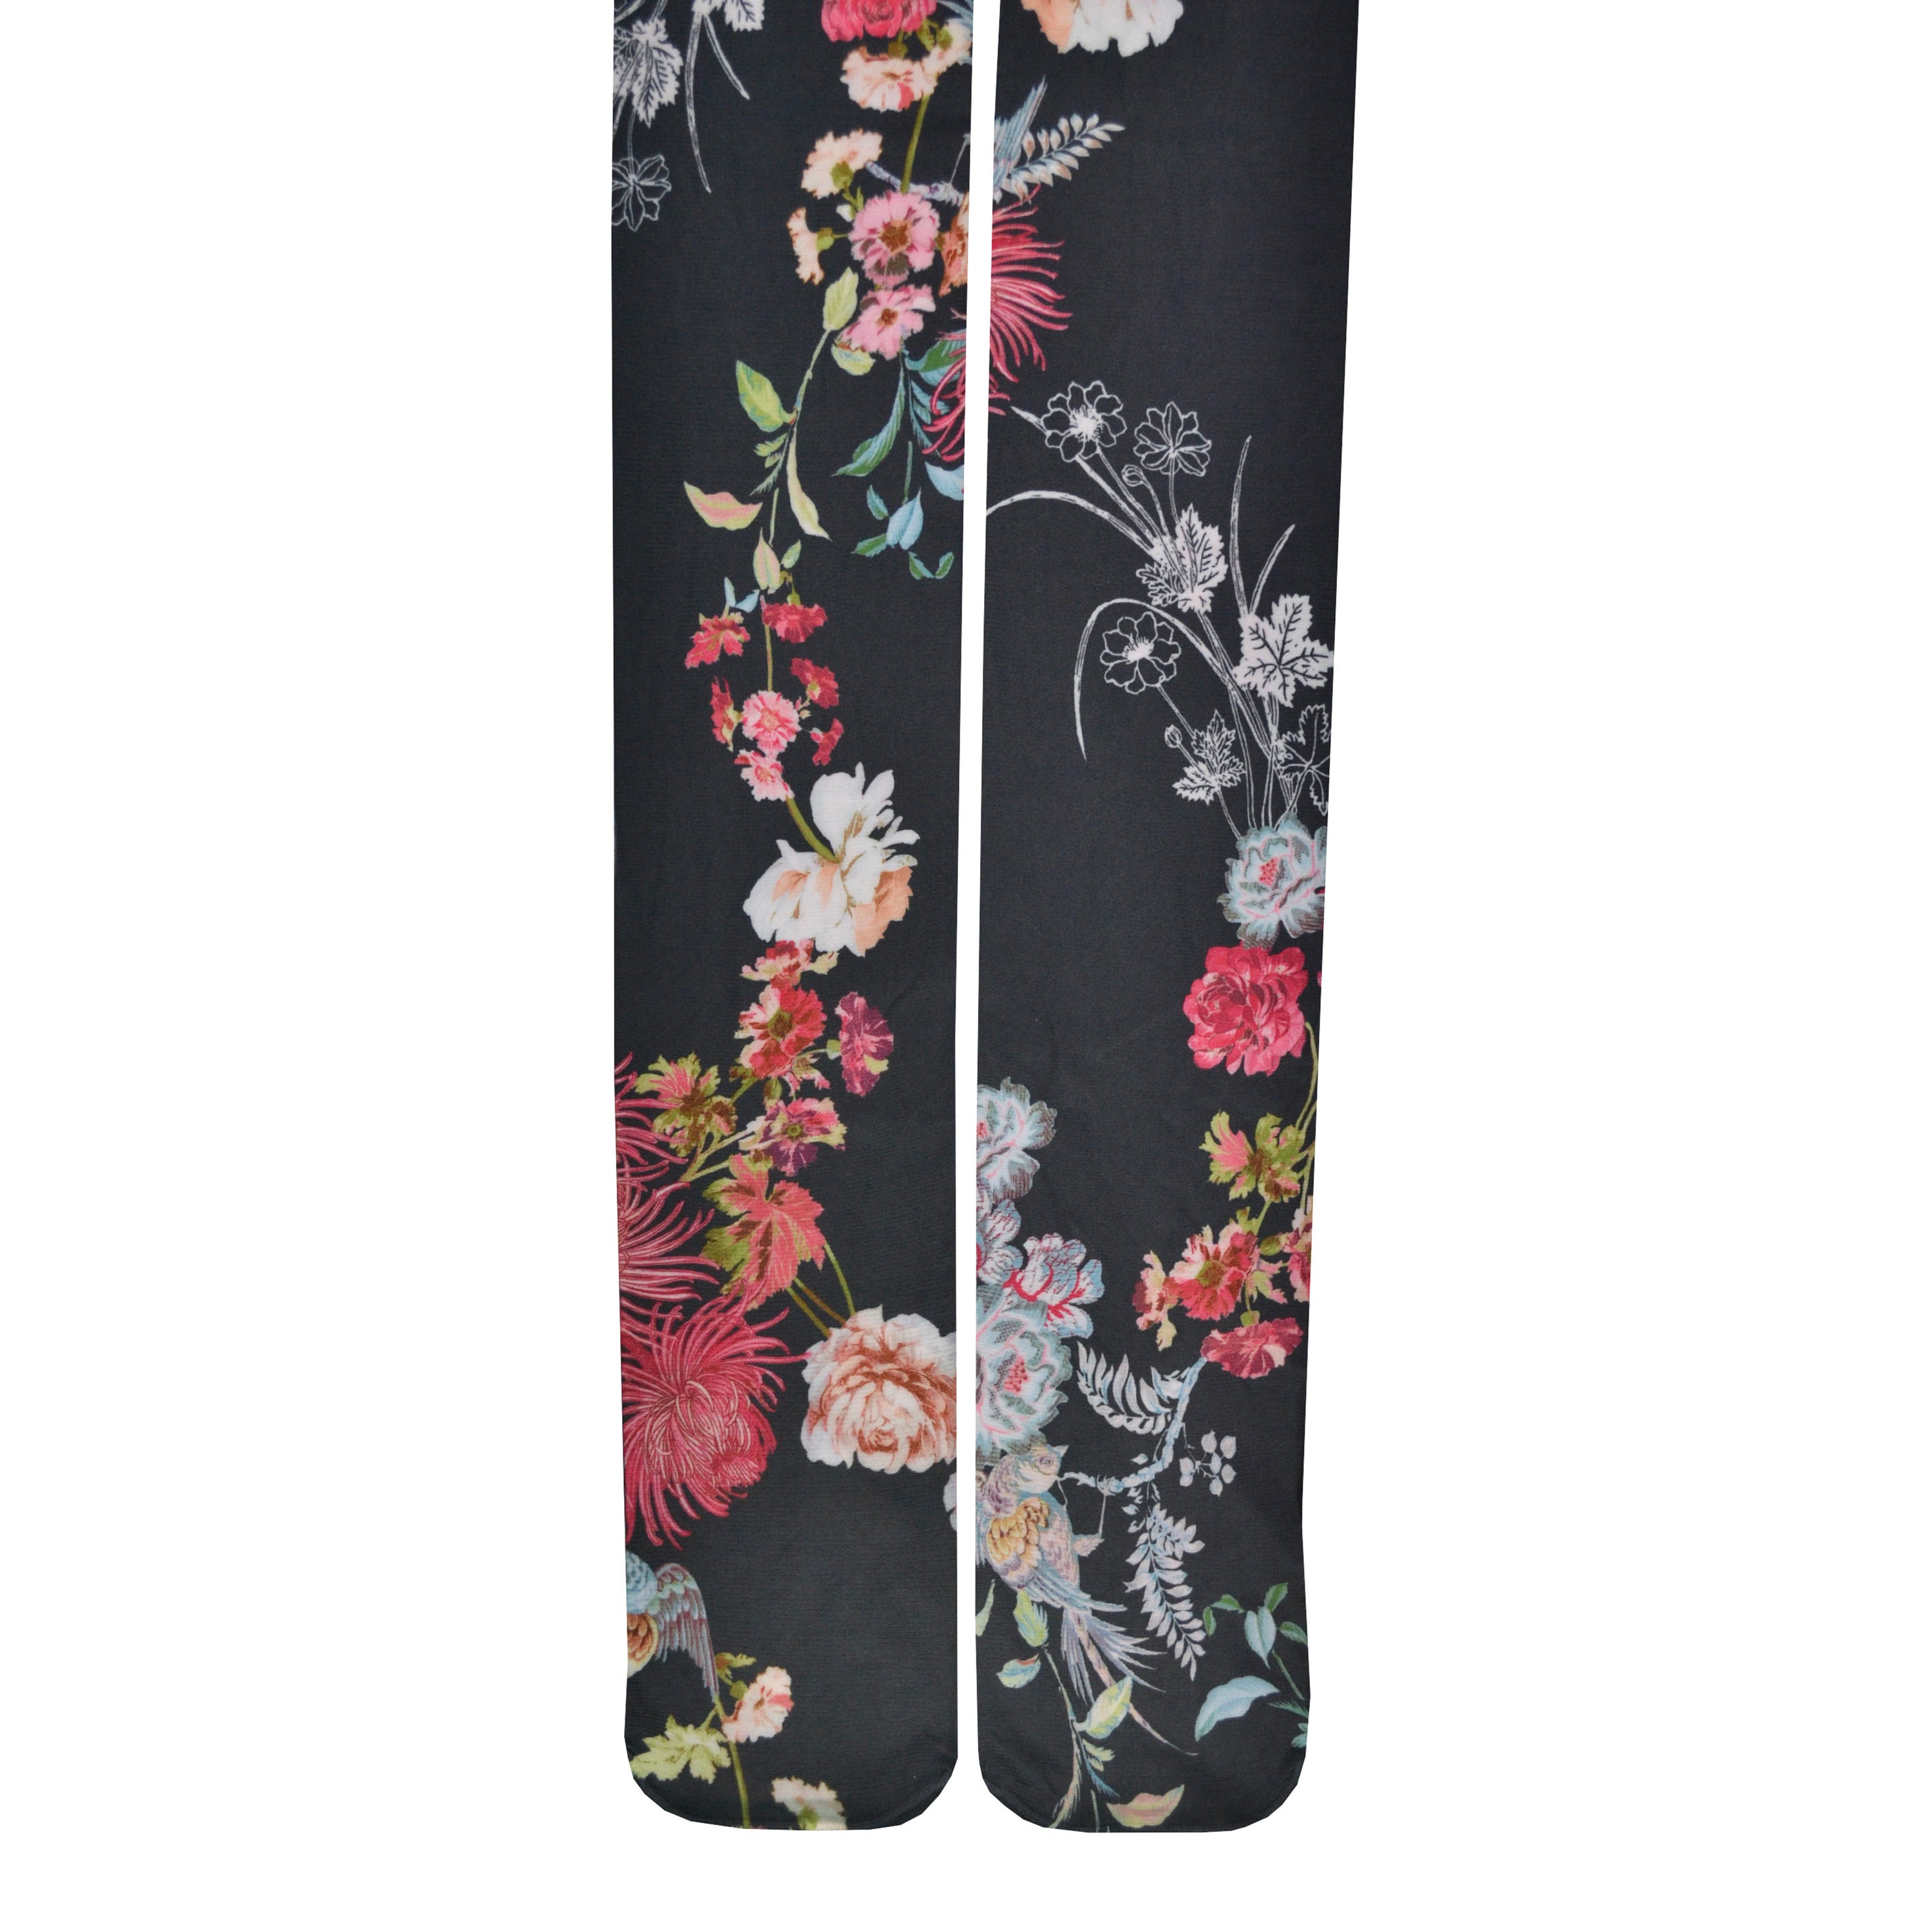 Shown in a flatlay, a pair of grey tights with an all over pink, blue, green, and yellow floral design. Each leg of the tight features a different orientation of the floral design.